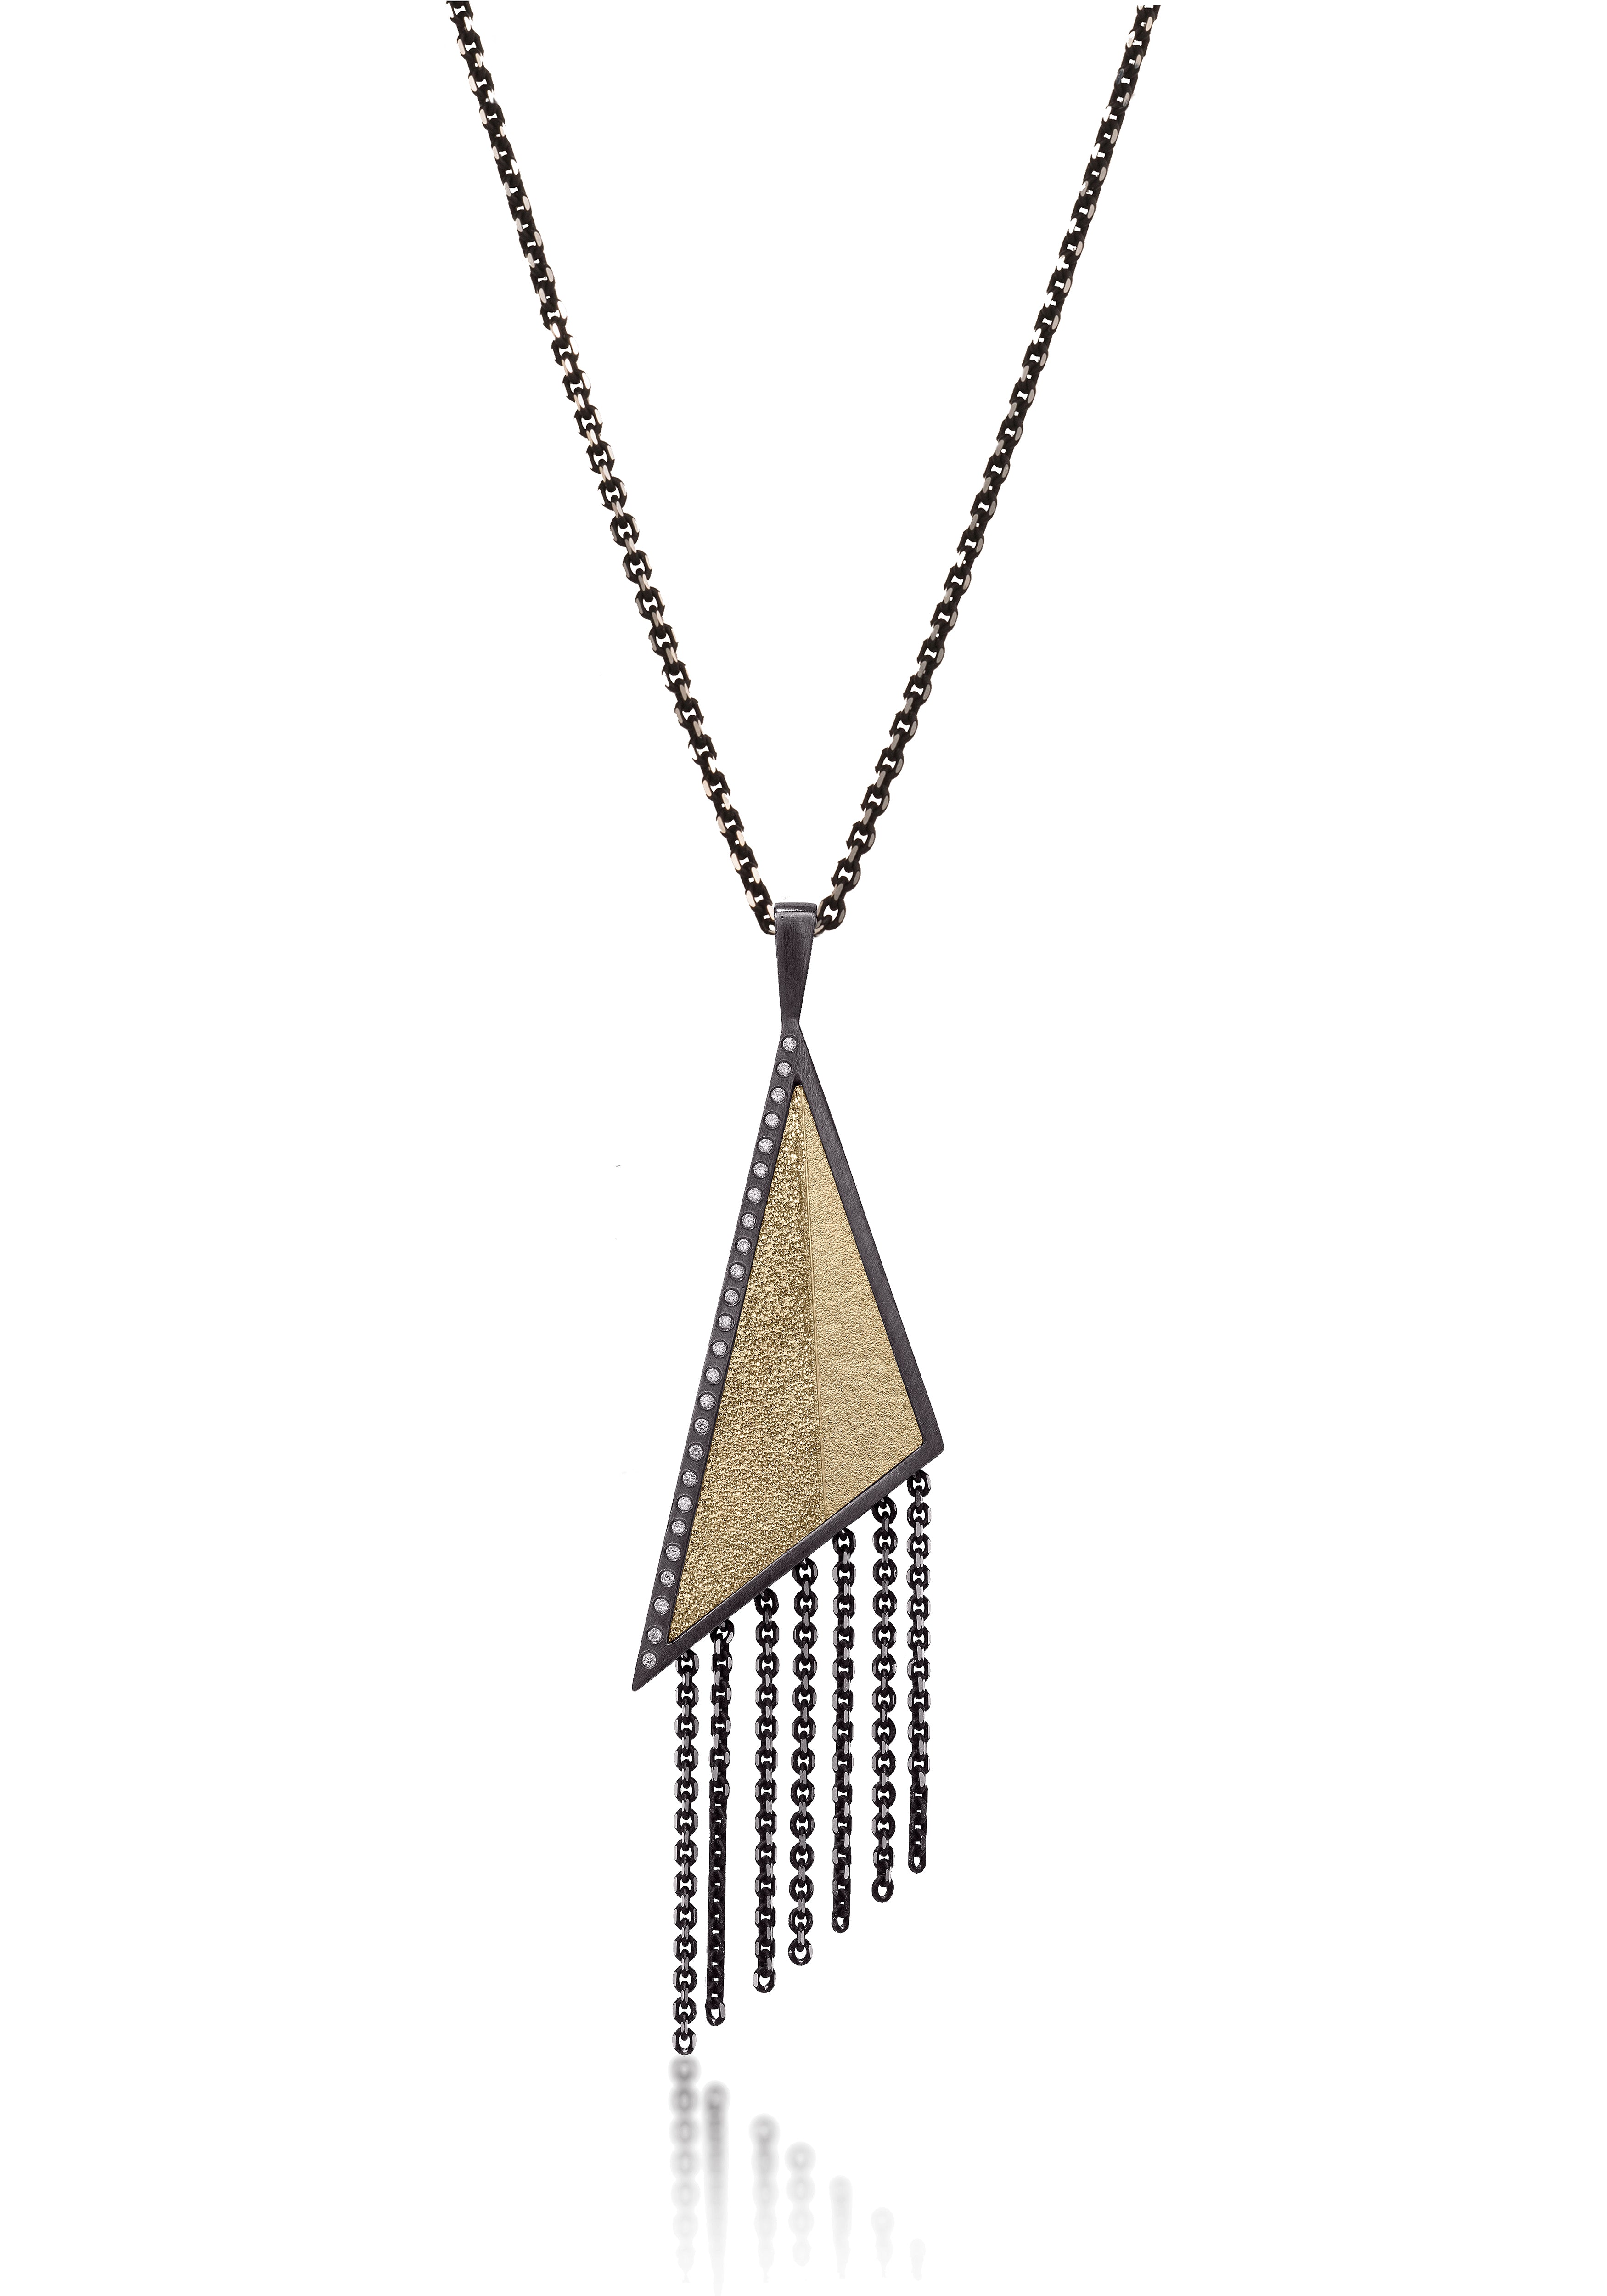 This oxidized sterling silver and richly textured 18k bimetal is flush set with ideal cut white diamonds.  Accent facet glitters with the texture of diamond facets, individually scored and hand textured. Available as a simple pendant or with fringe.  0.1725 tcw